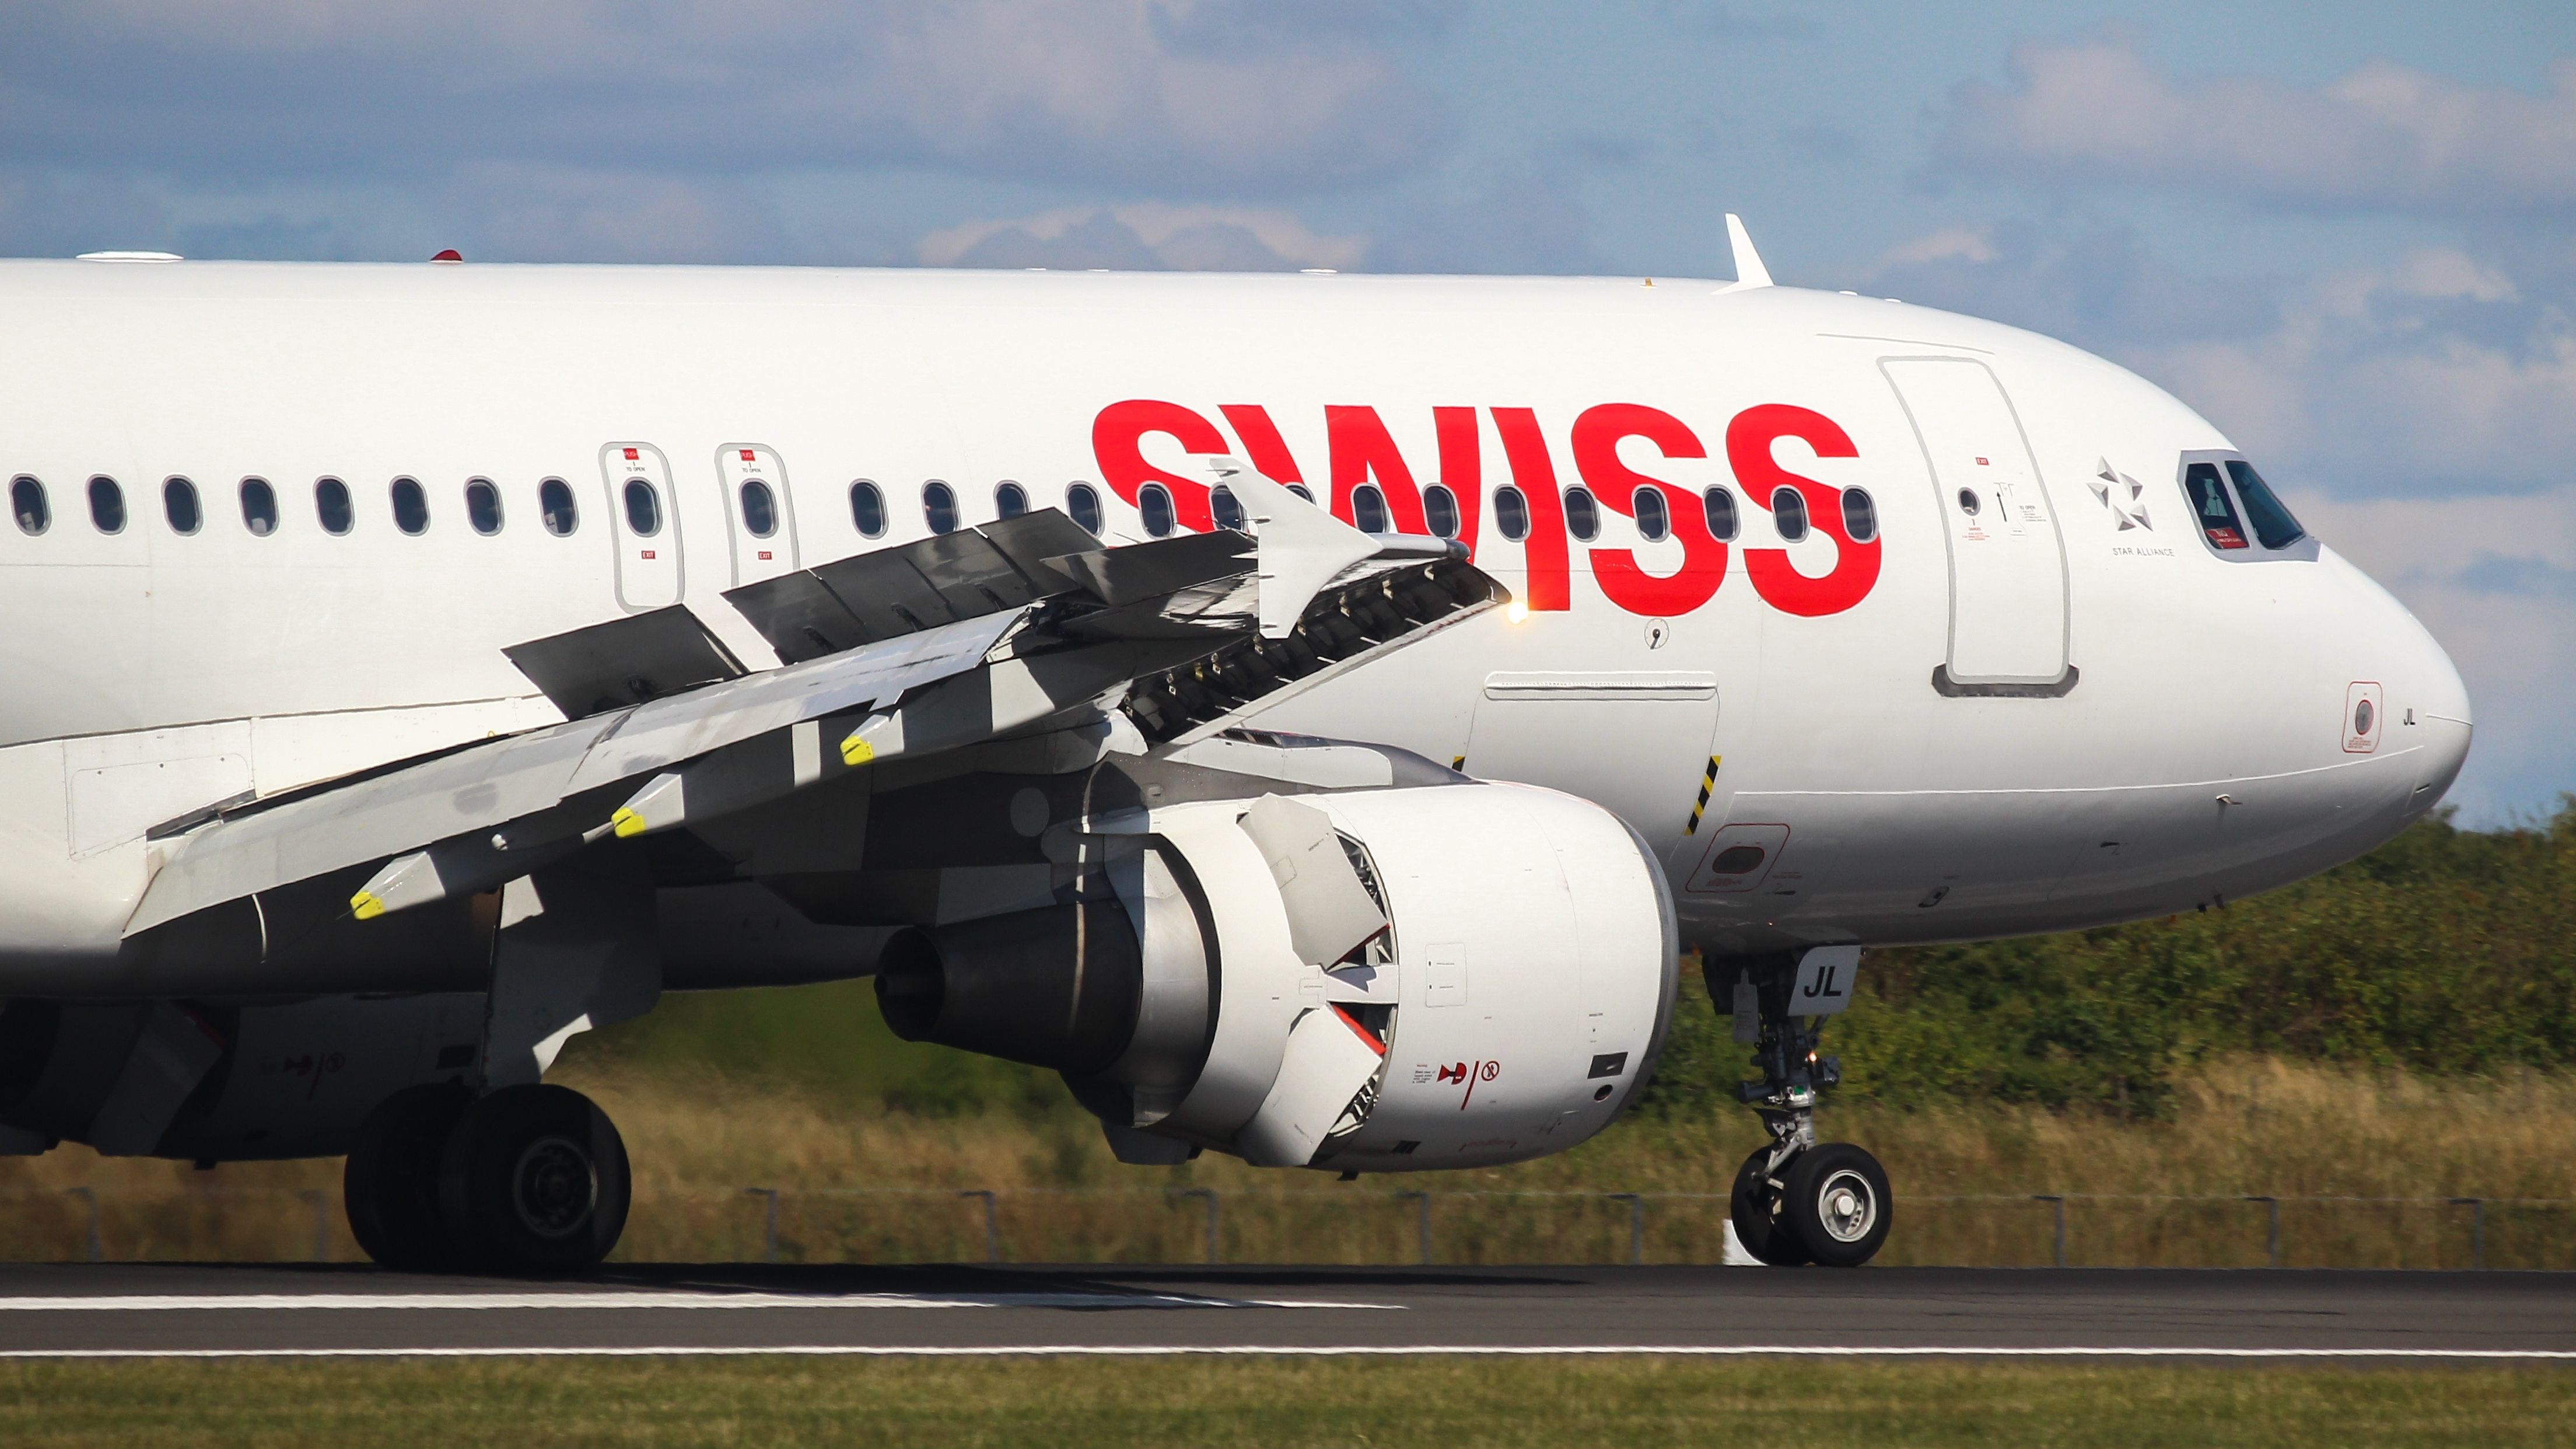 A Swiss Airlines Airbus A320, registration HB-IJL, on the taxiway.